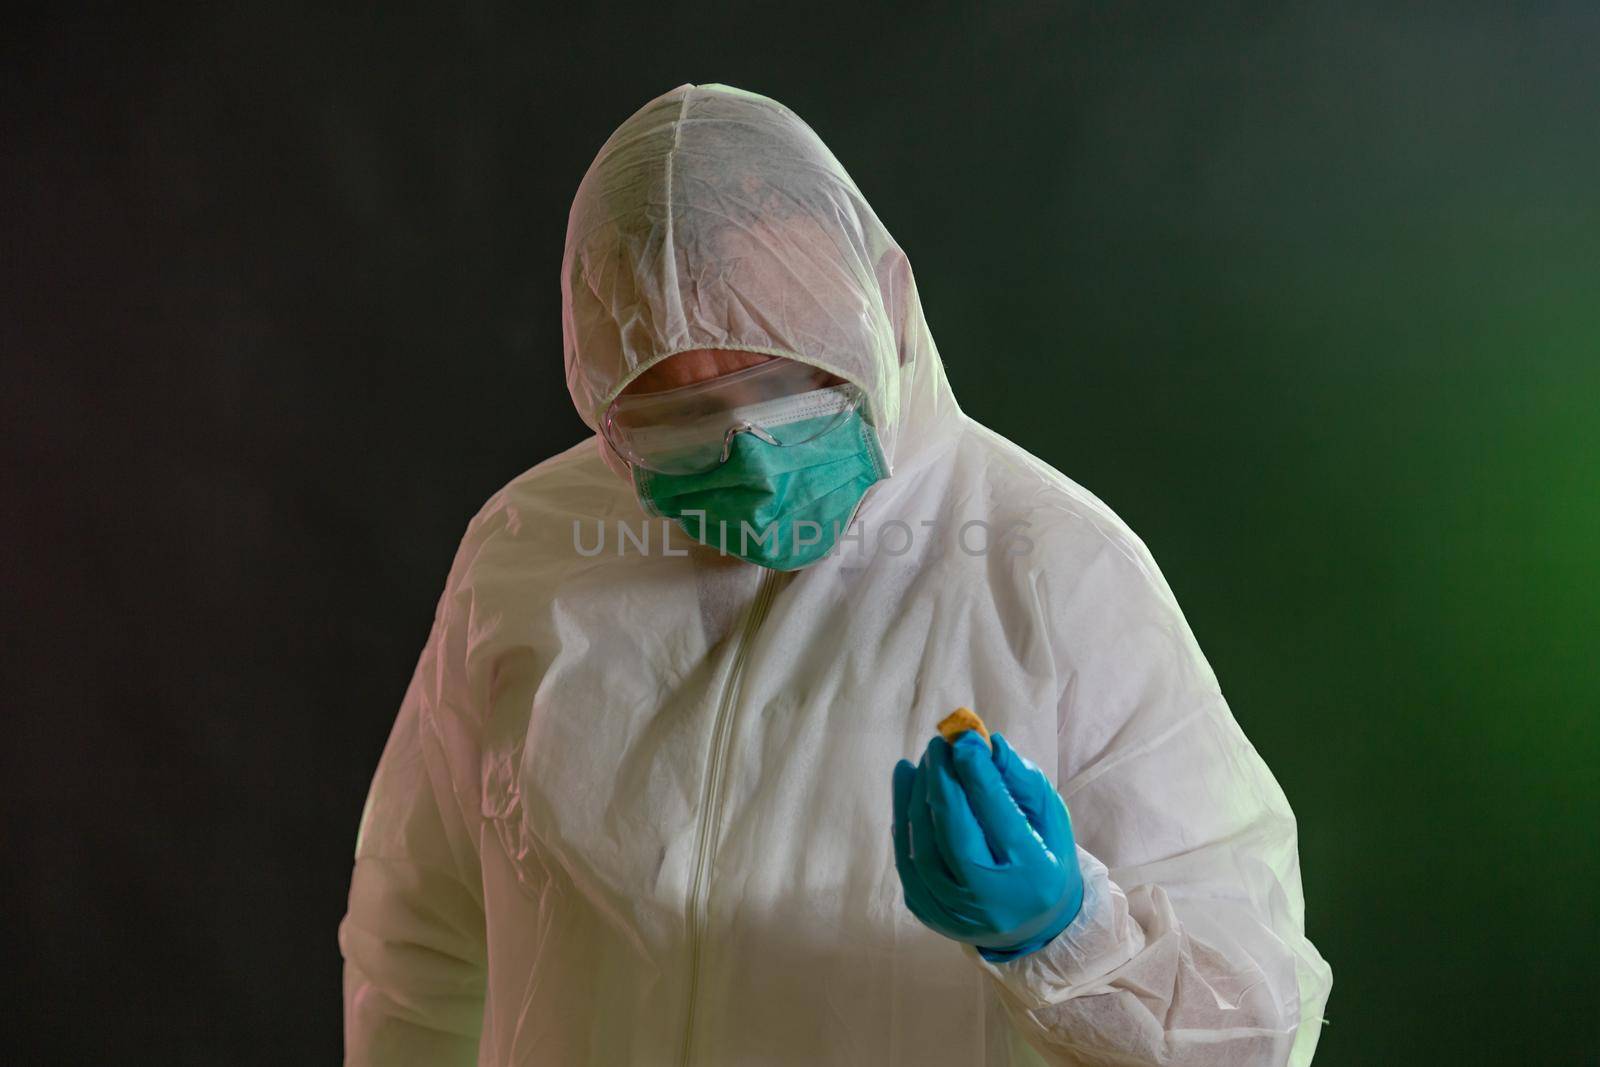 Man in chemical suit inspecting possible toxic materials